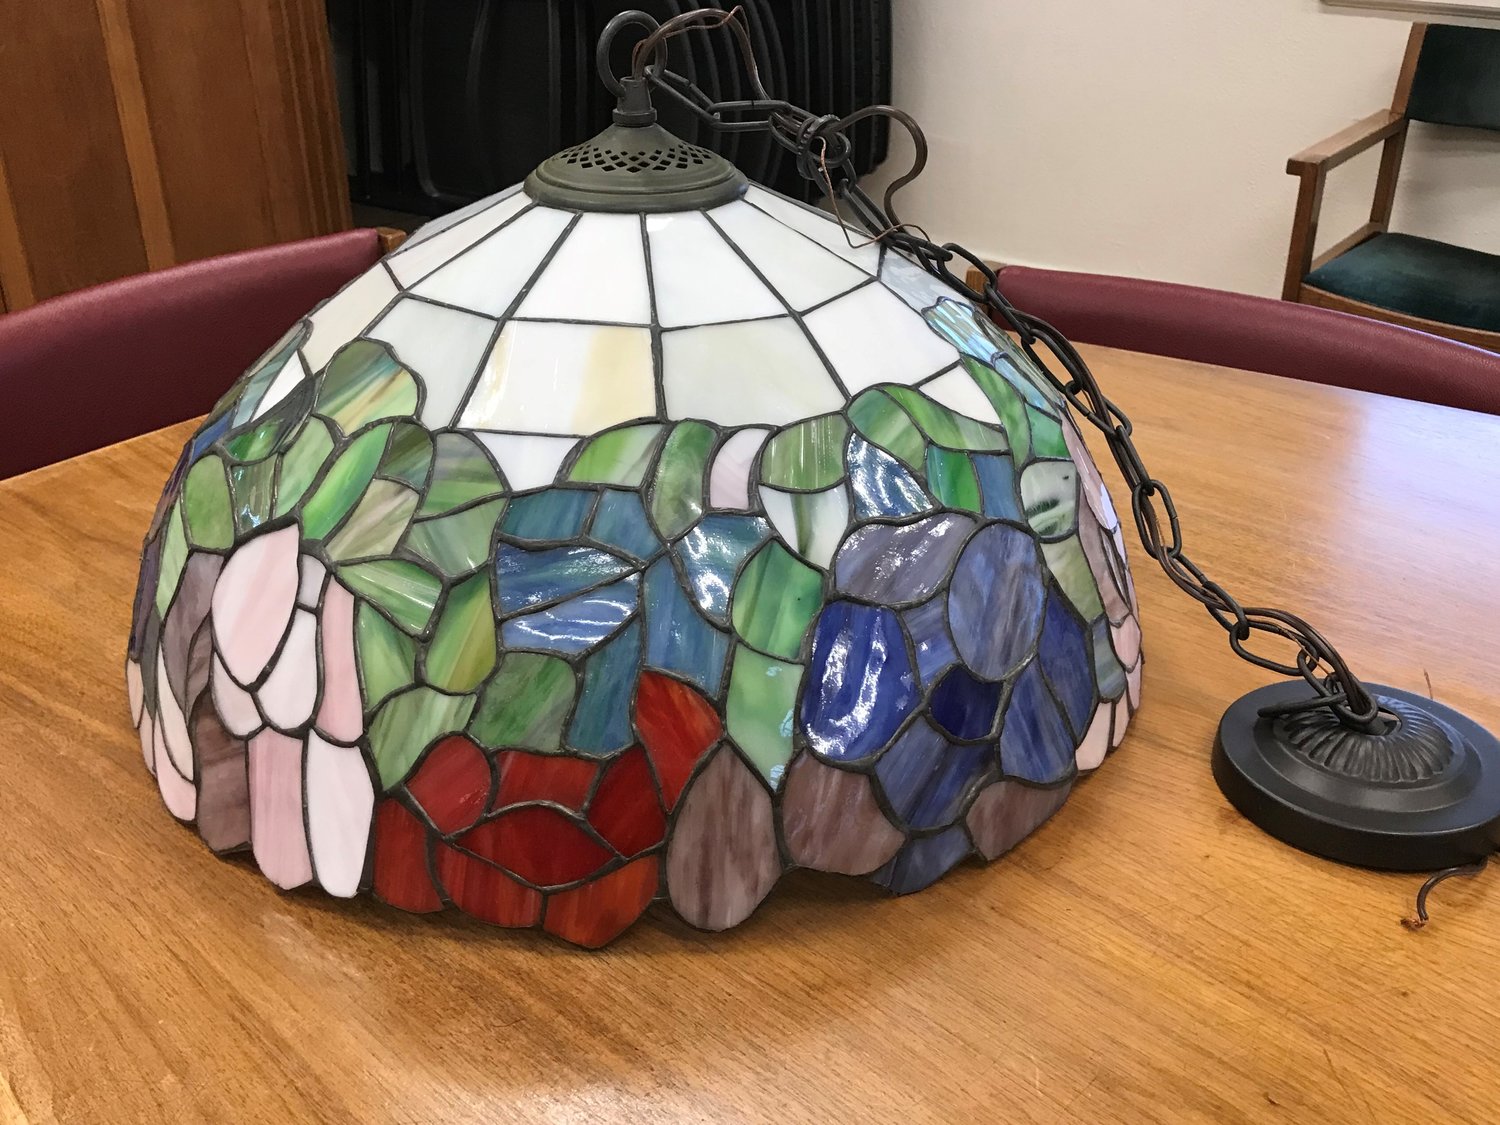 HANGING LIGHT — A Tiffany-style hanging pendant light is one of four items up for raffle for the Canastota Public Library’s “Show Your Home a Little Love” fundraiser.